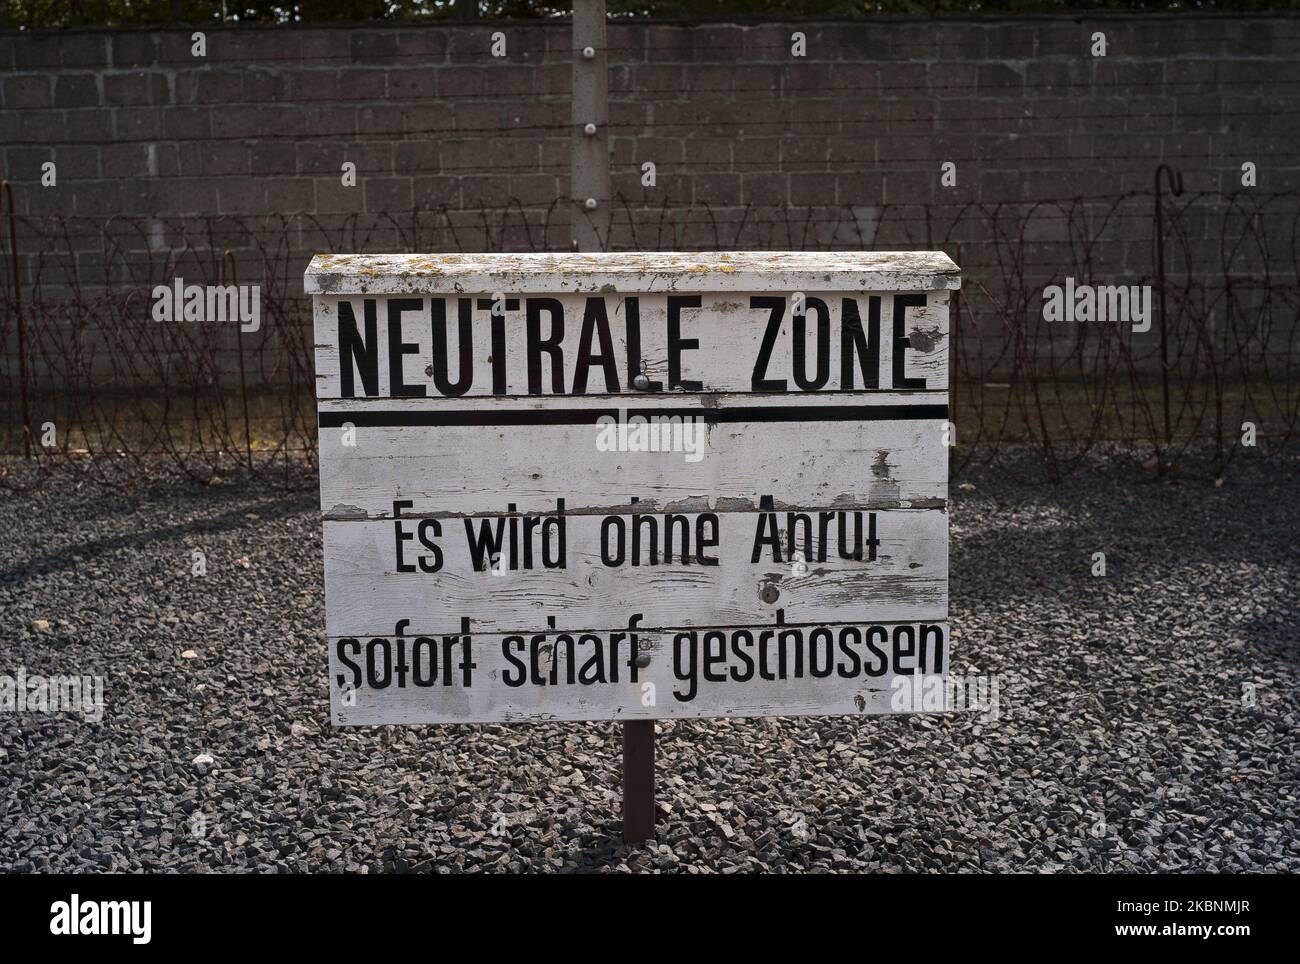 A sign that reads ''Neutrale Zone - Es wird ohne Anruf sofort scharf geschossen'' (Neutral Zone - Immediate live fire without warning'' is seen in the Sachsenhausen concentration camp, located in the town of Oranienburg, Brandenburg, Germany, on August 30, 2014, was built by the Nazis in 1936 to confine political opponents, Jews, prisoners of war. Today is a Memorial and Museum. (Photo by Oscar Gonzalez/NurPhoto) Stock Photo